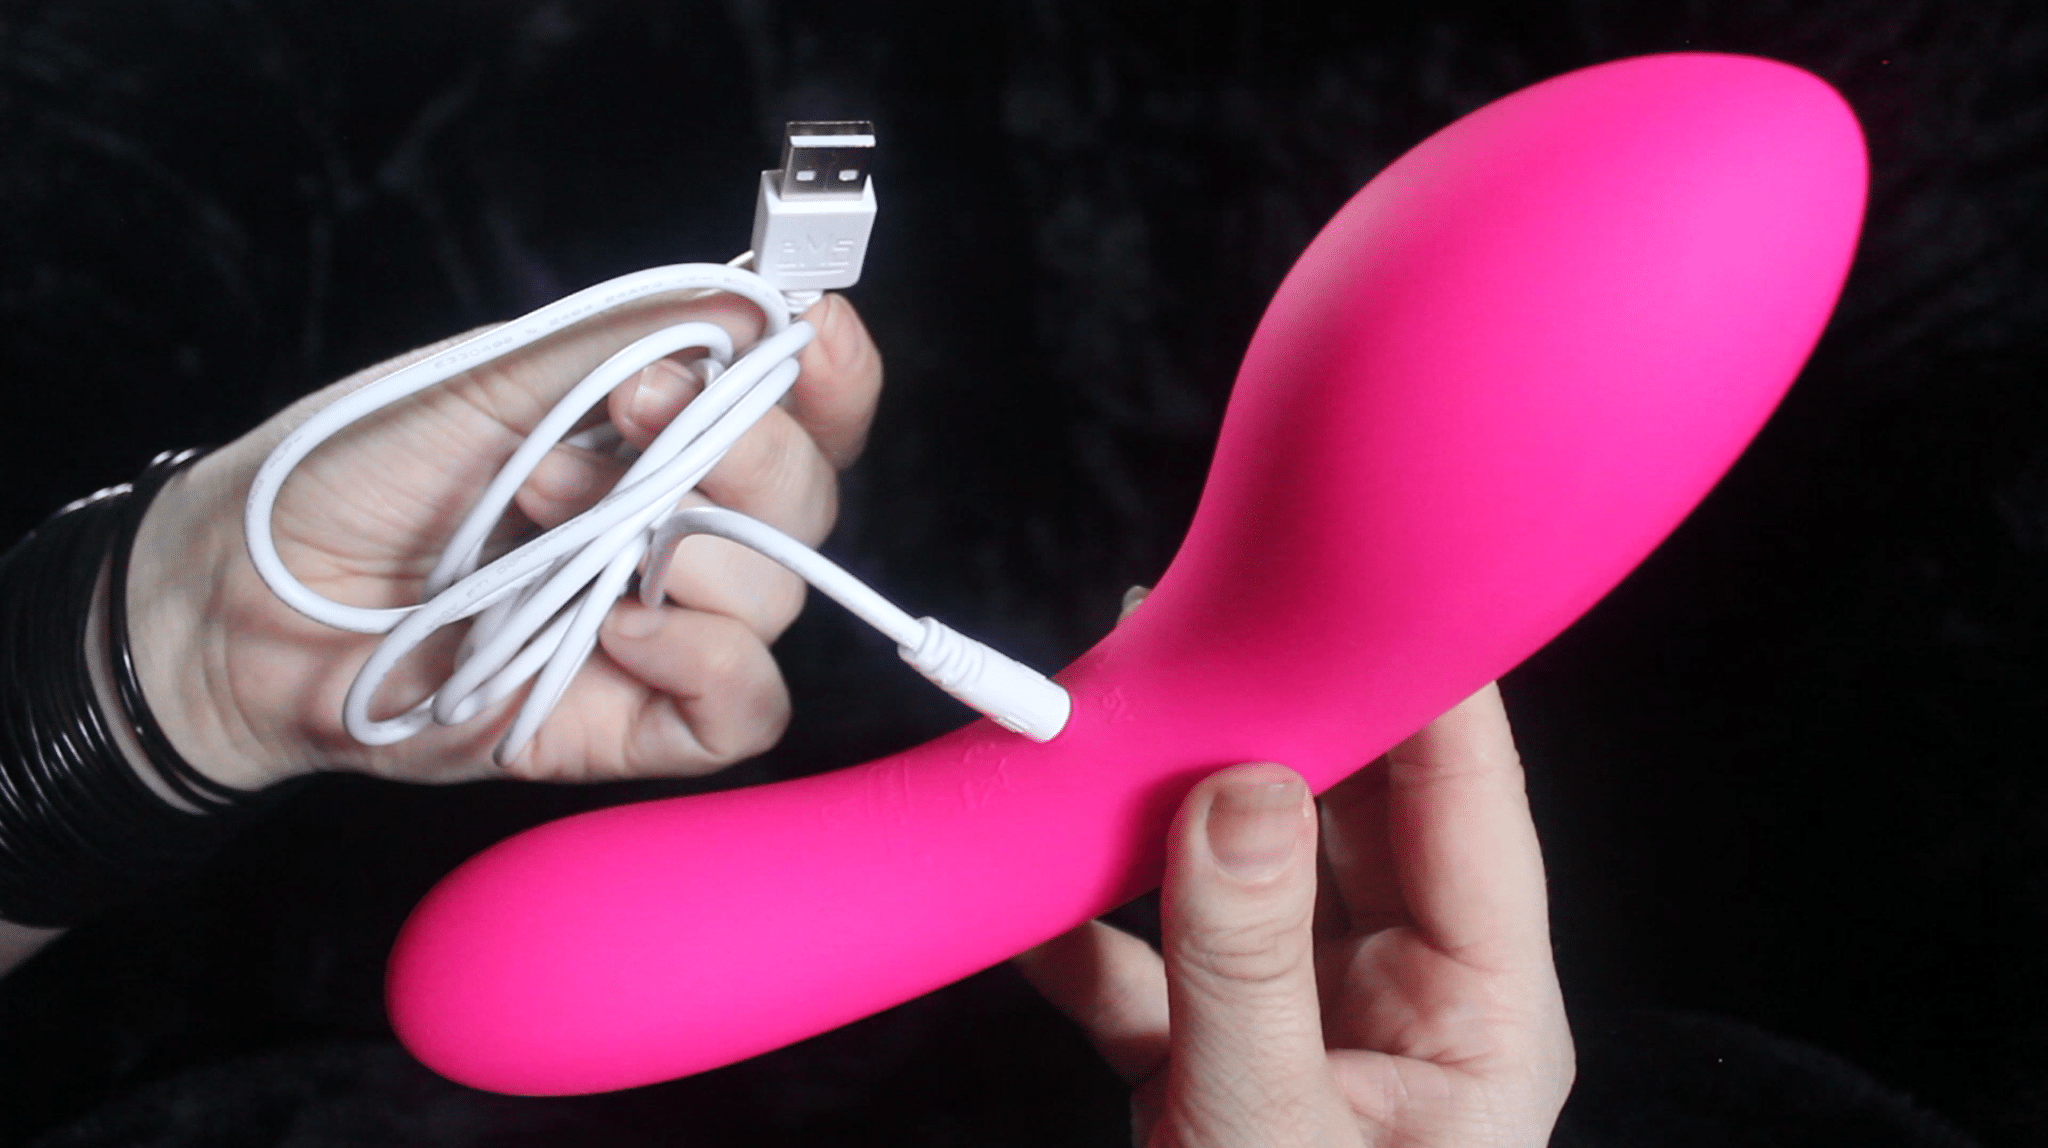 The Swan Wand Dual Ended Vibrator. Slide 5